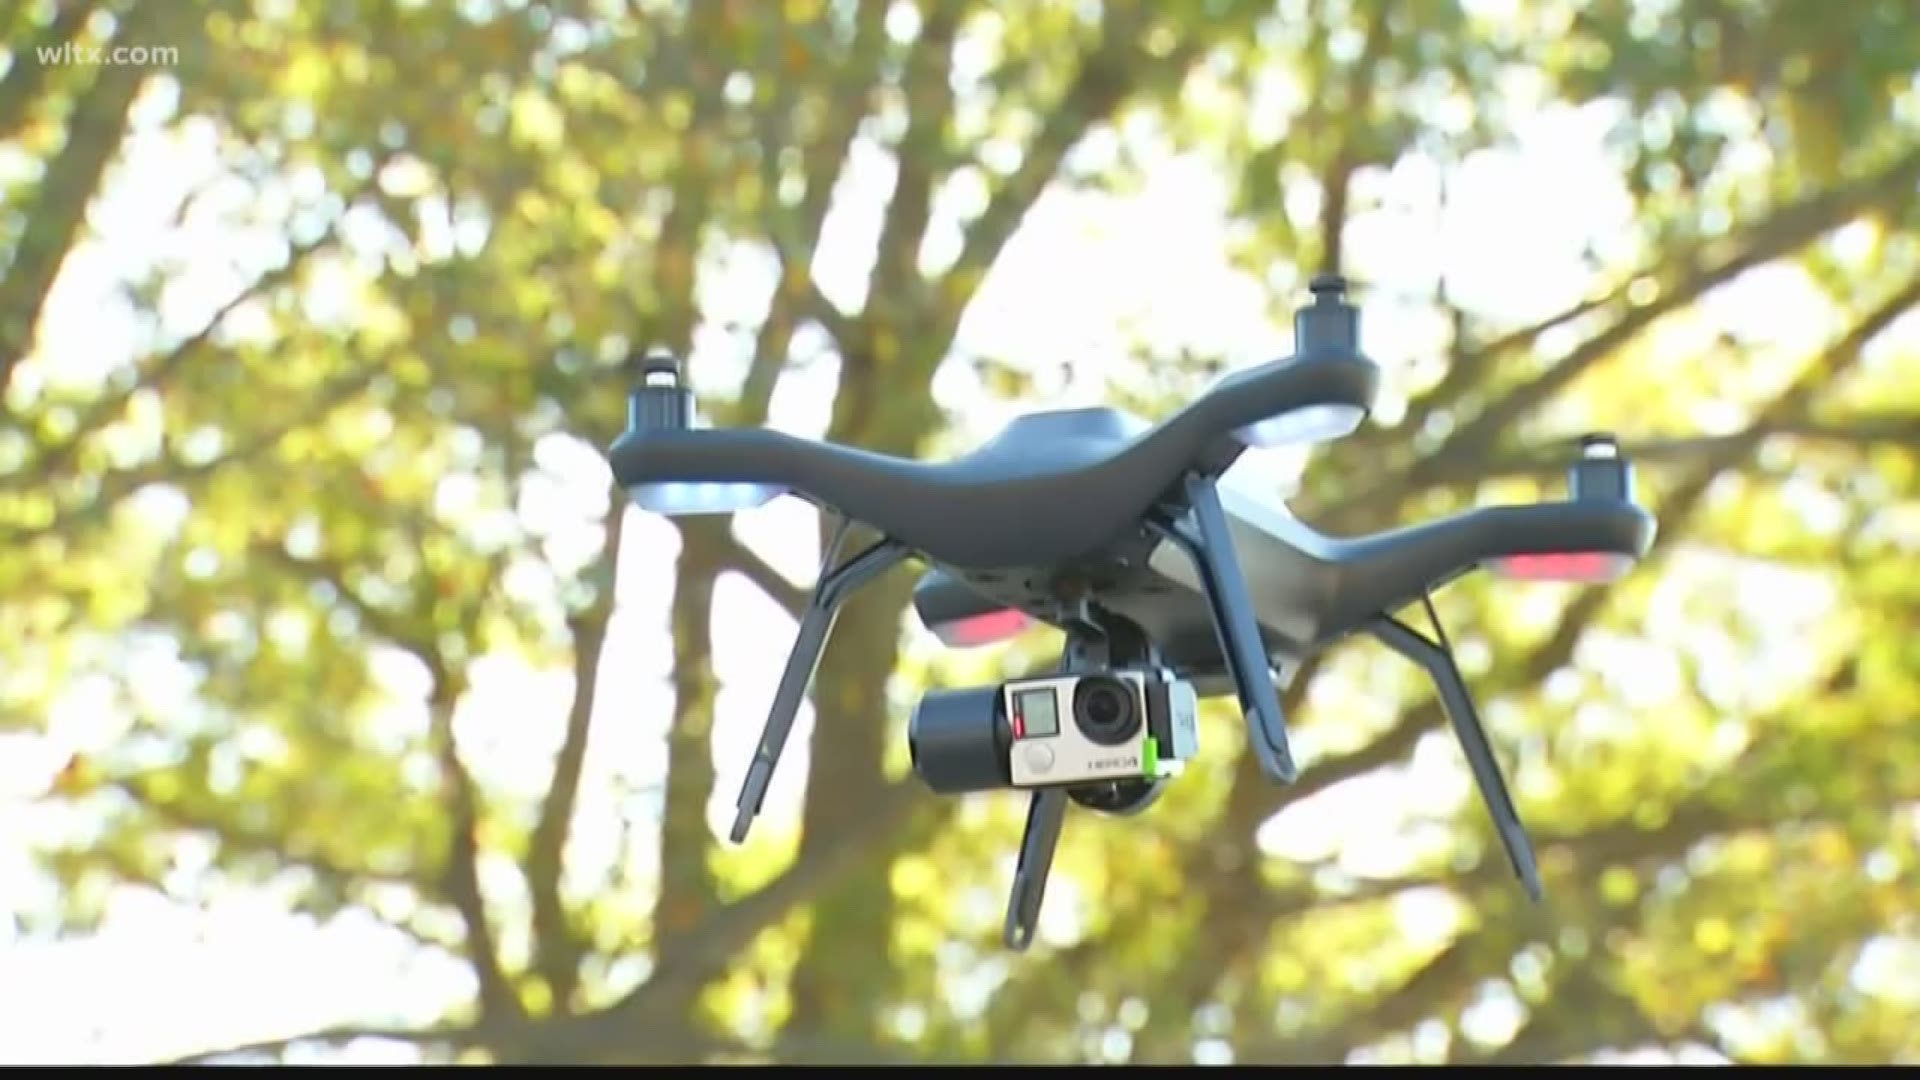 Students at one Lee County high school will soon have the chance to become drone certified.